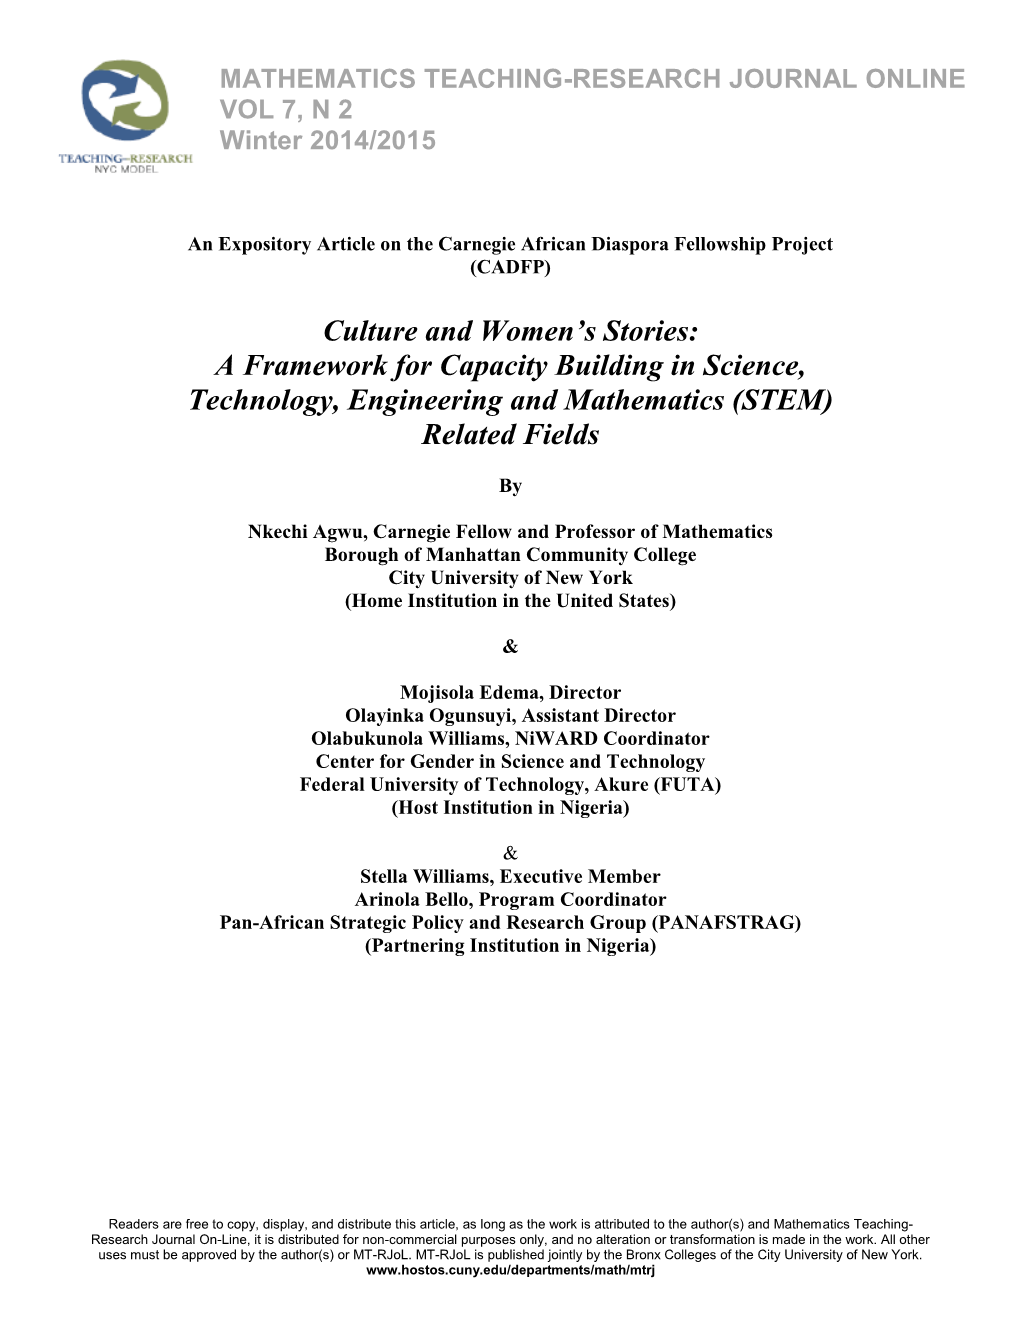 Culture and Women's Stories: a Framework